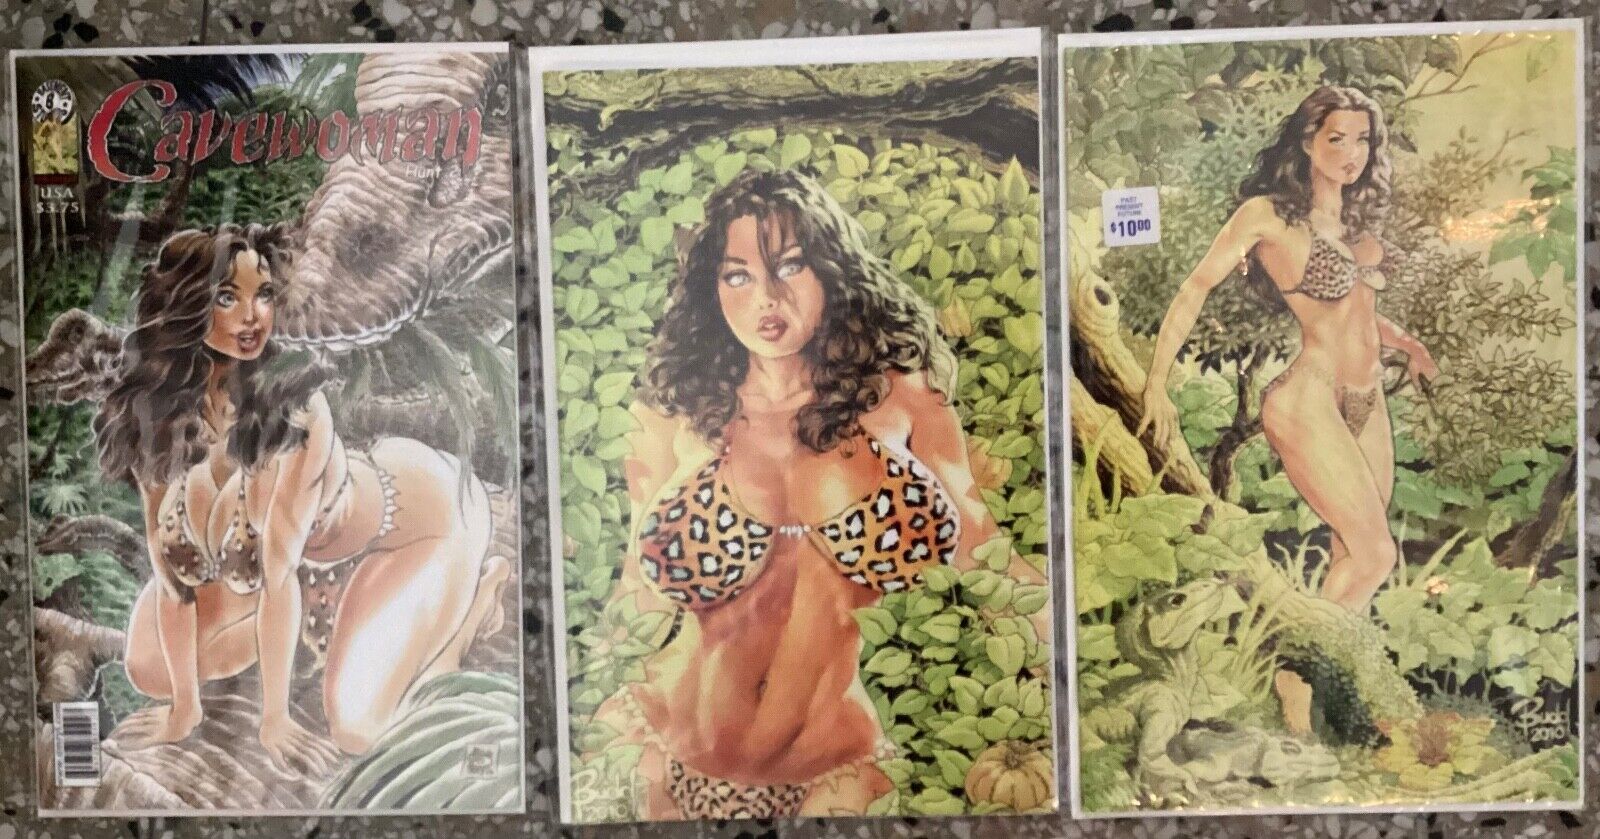 Cavewoman Hunt Lot of 3 Covers Budd Root Variant/Special